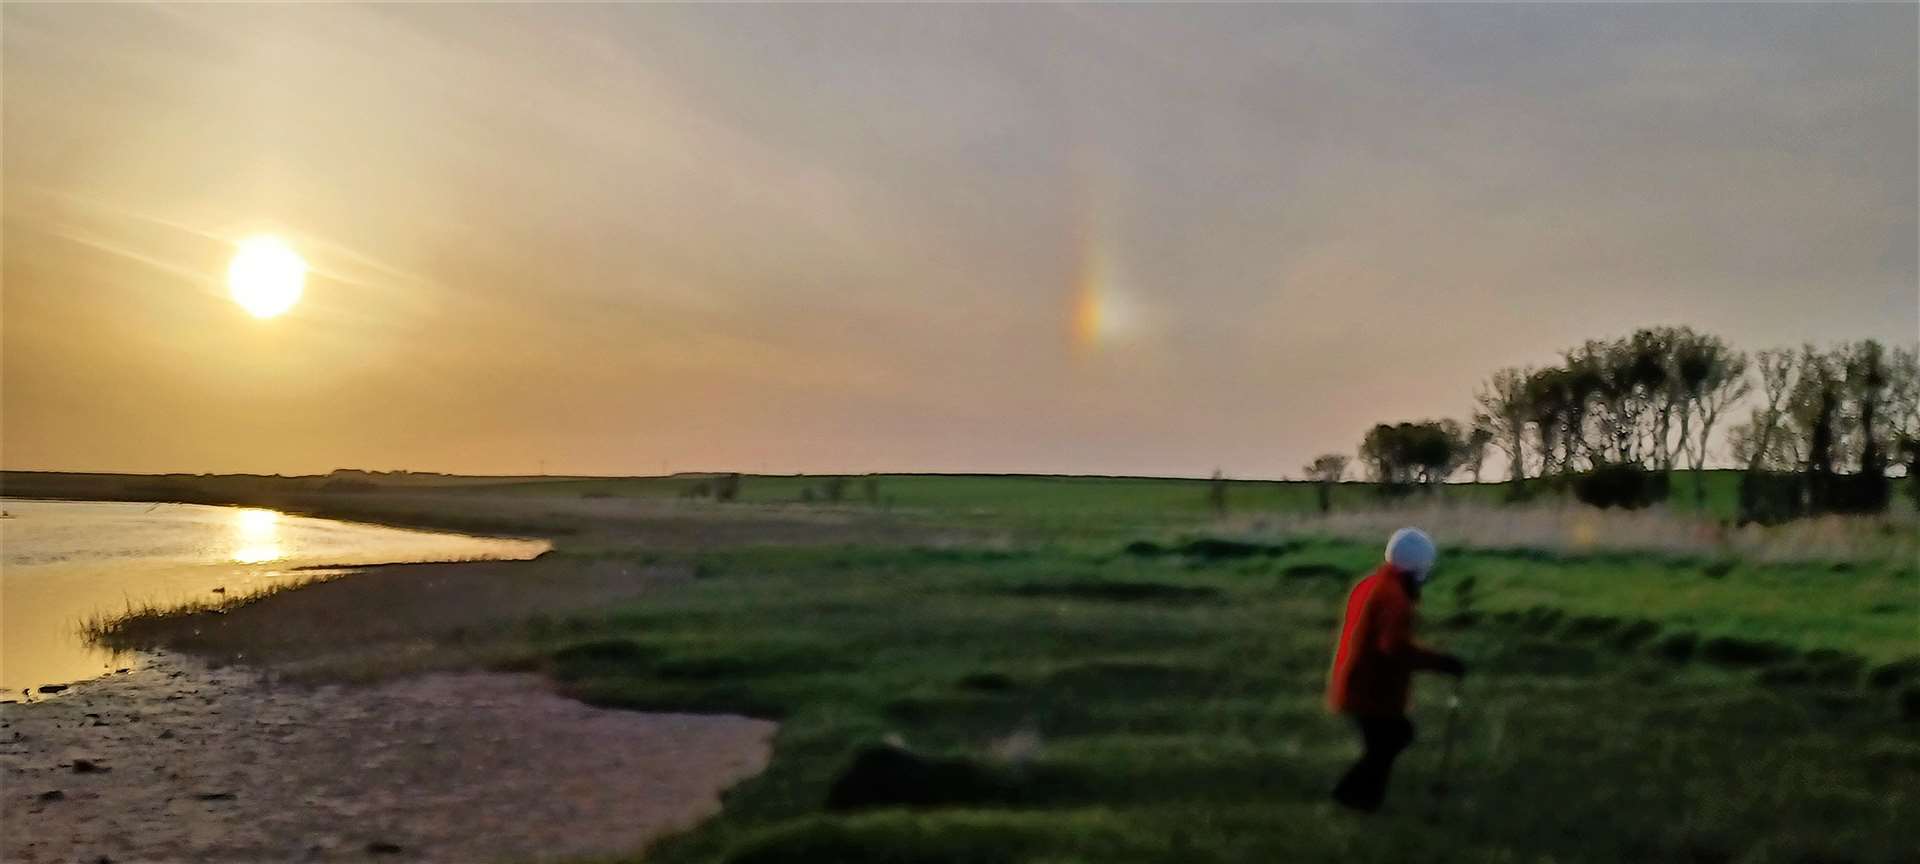 Sun dogs are commonly caused by the refraction and scattering of light from horizontally oriented plate-shaped hexagonal ice crystals. Picture: DGS